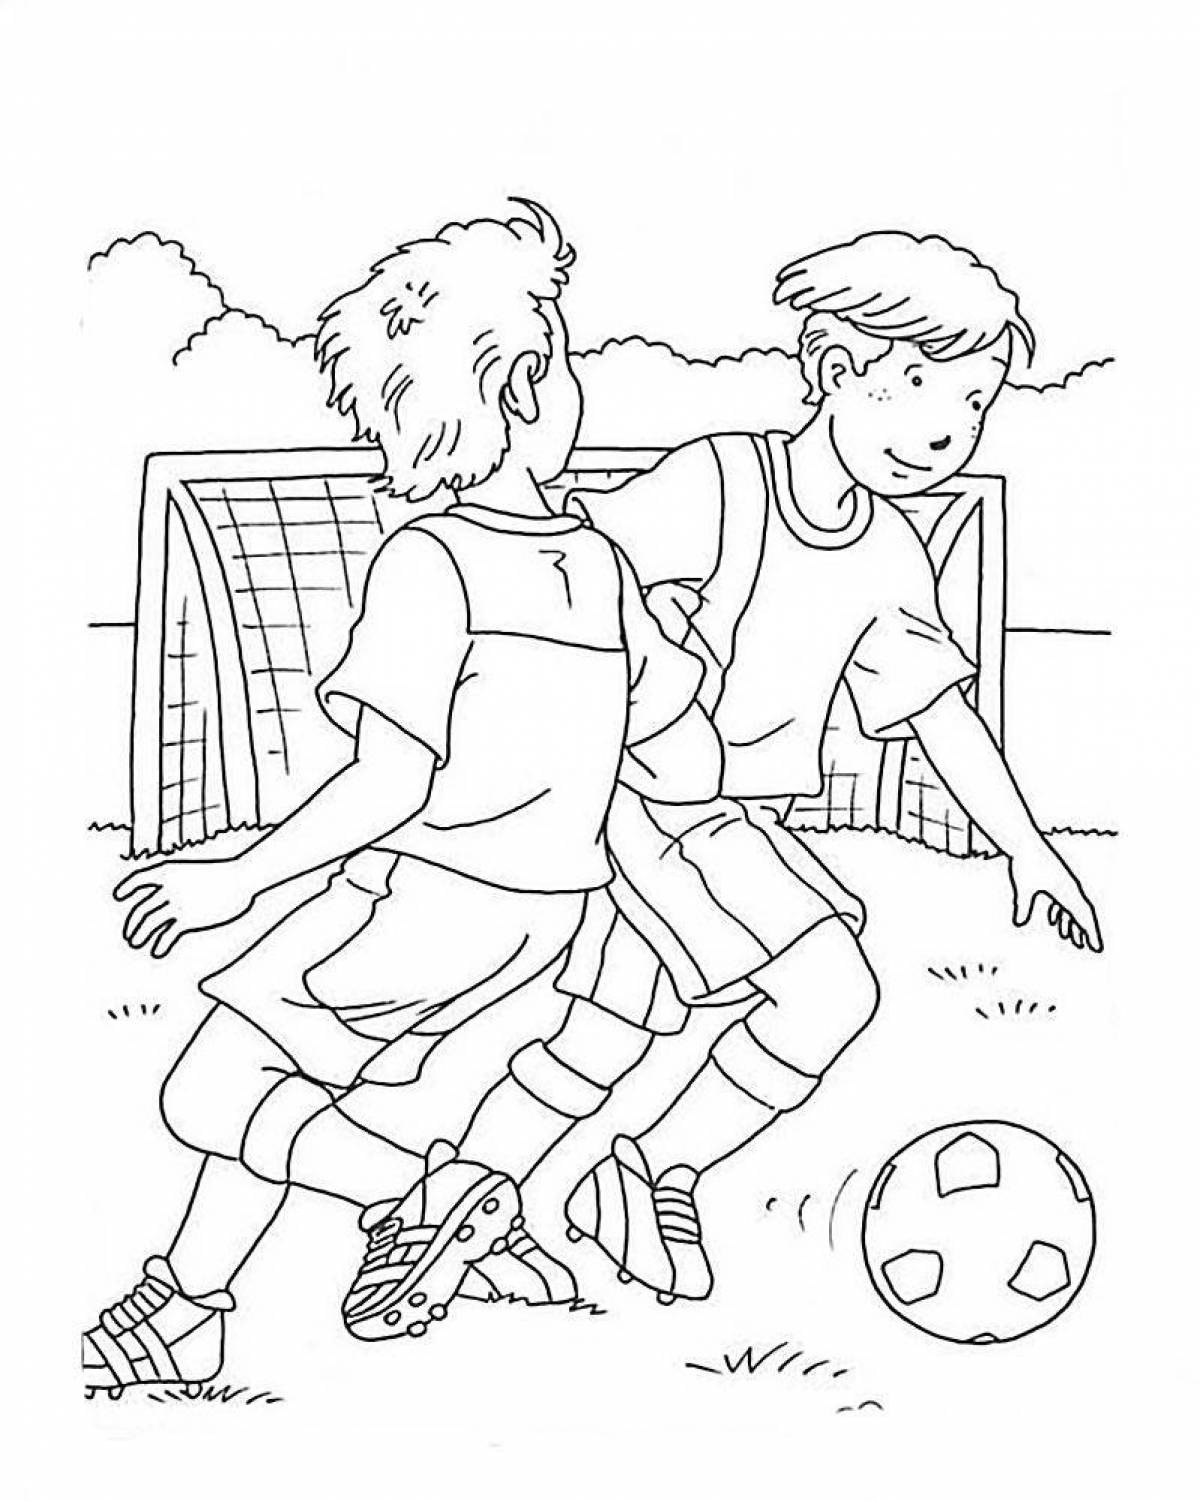 Amazing football coloring book for kids